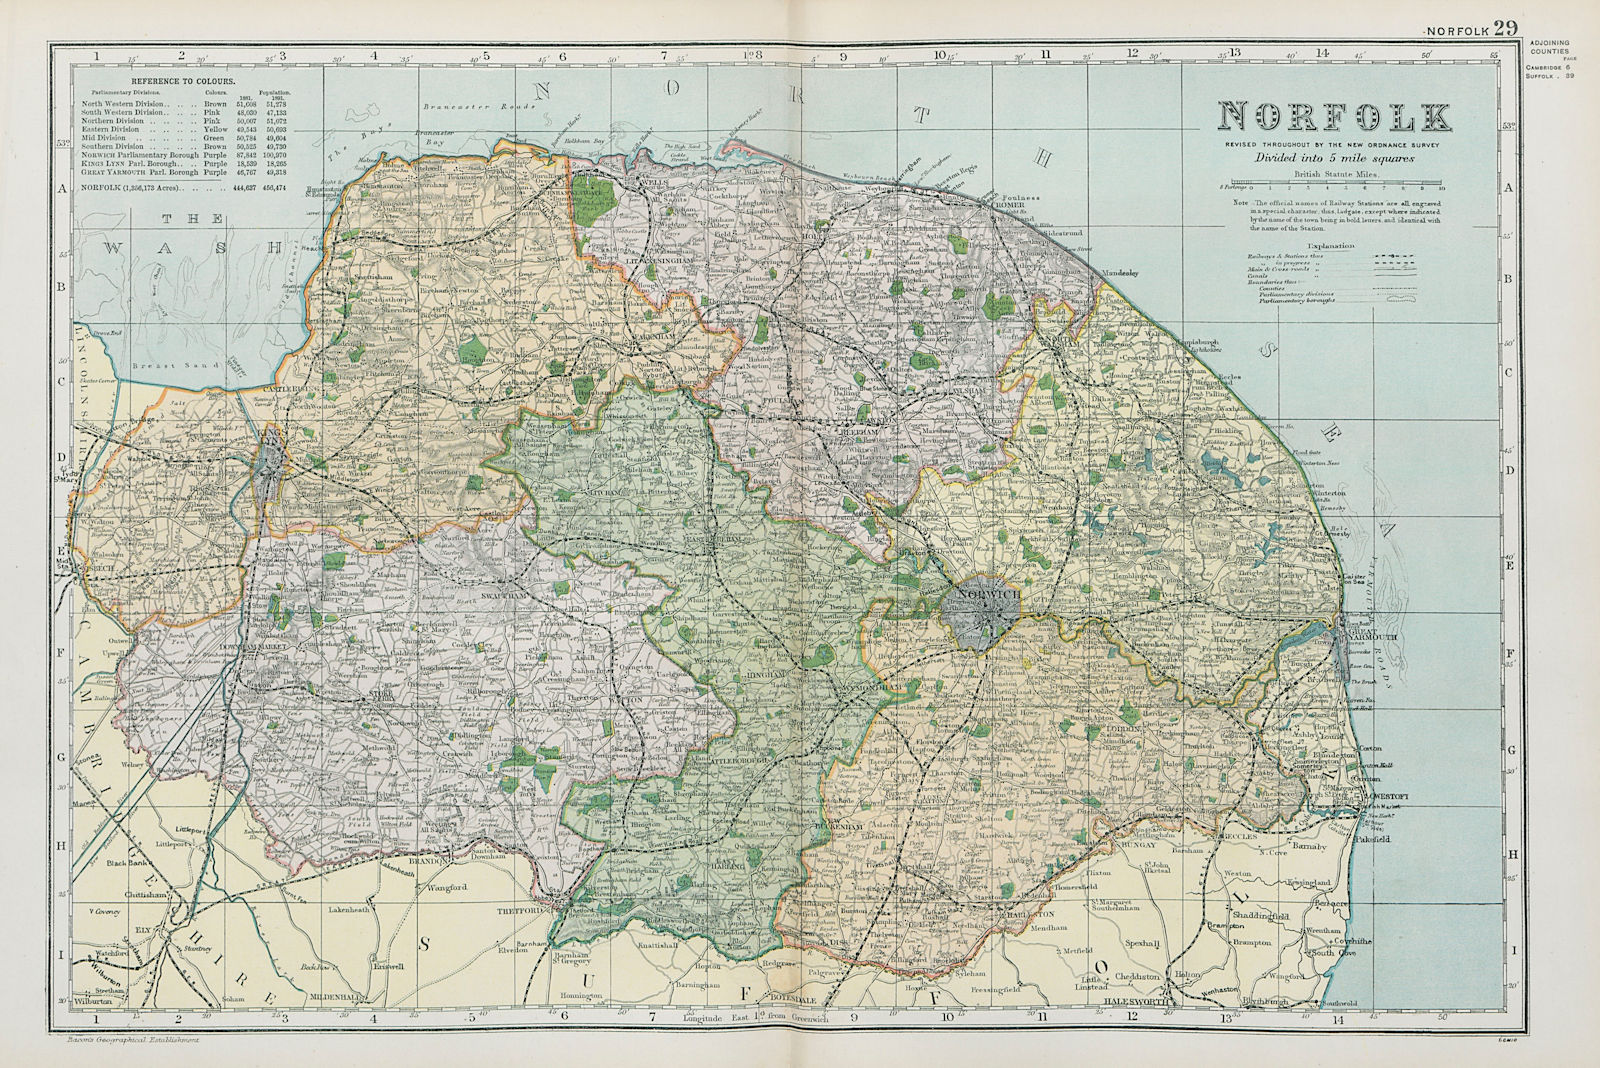 NORFOLK. Showing Parliamentary divisions, boroughs & parks. BACON 1900 old map